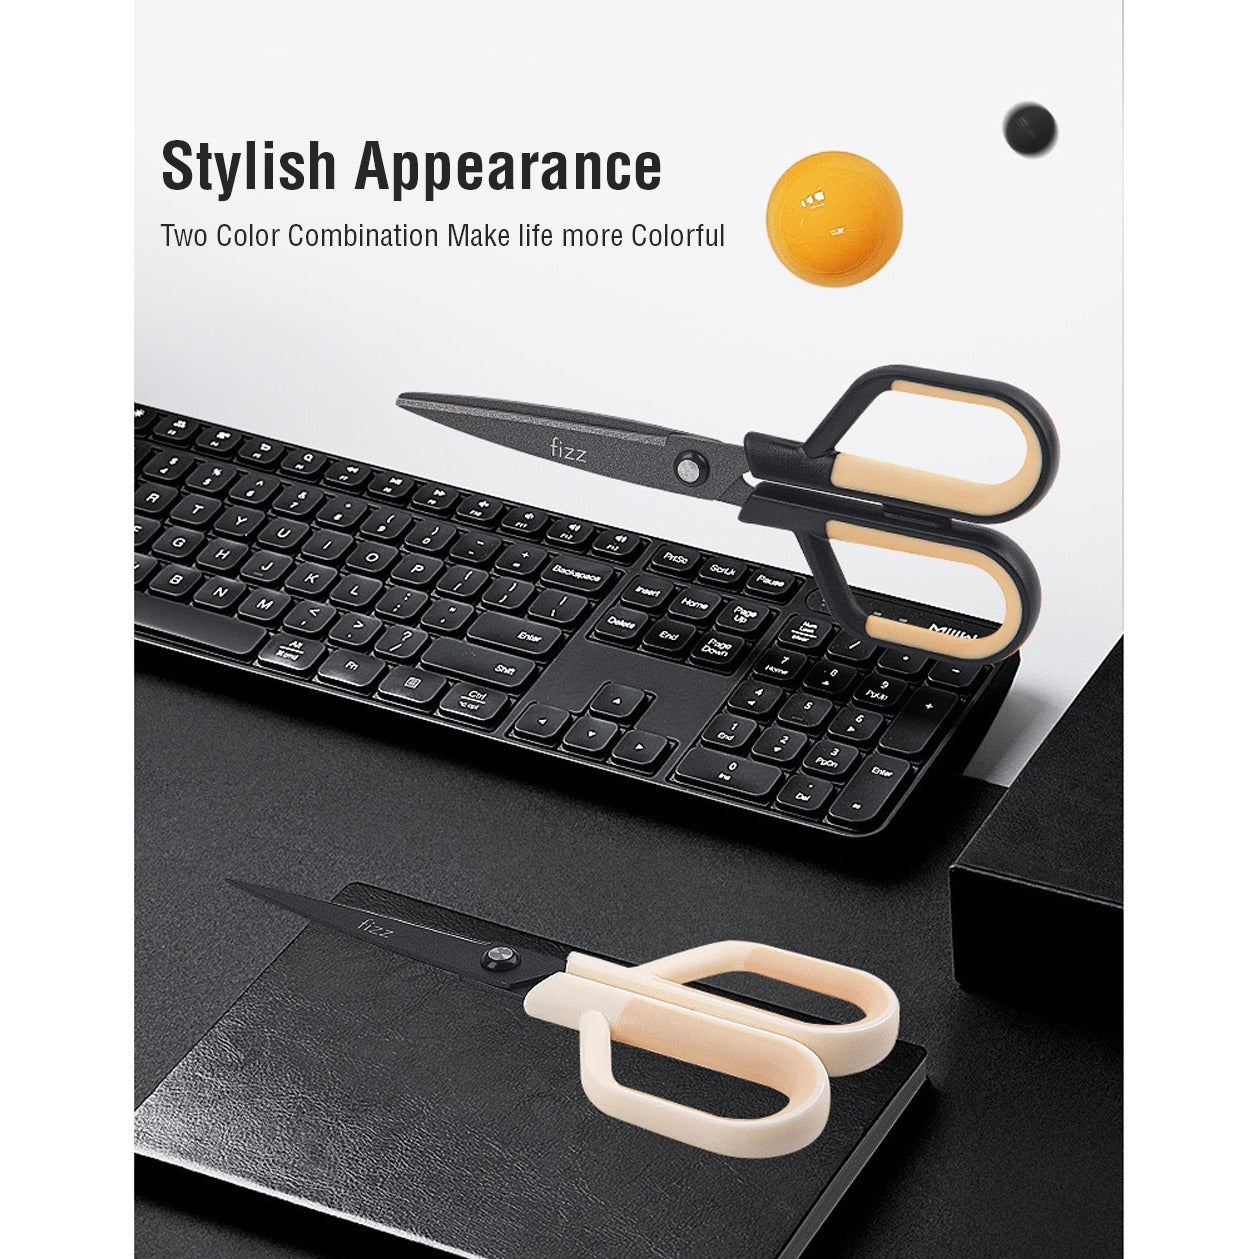 Showcasing the stylish appearance of 2 Scissors with Paper Cutting Blade placed on top of a keyboard and a book 